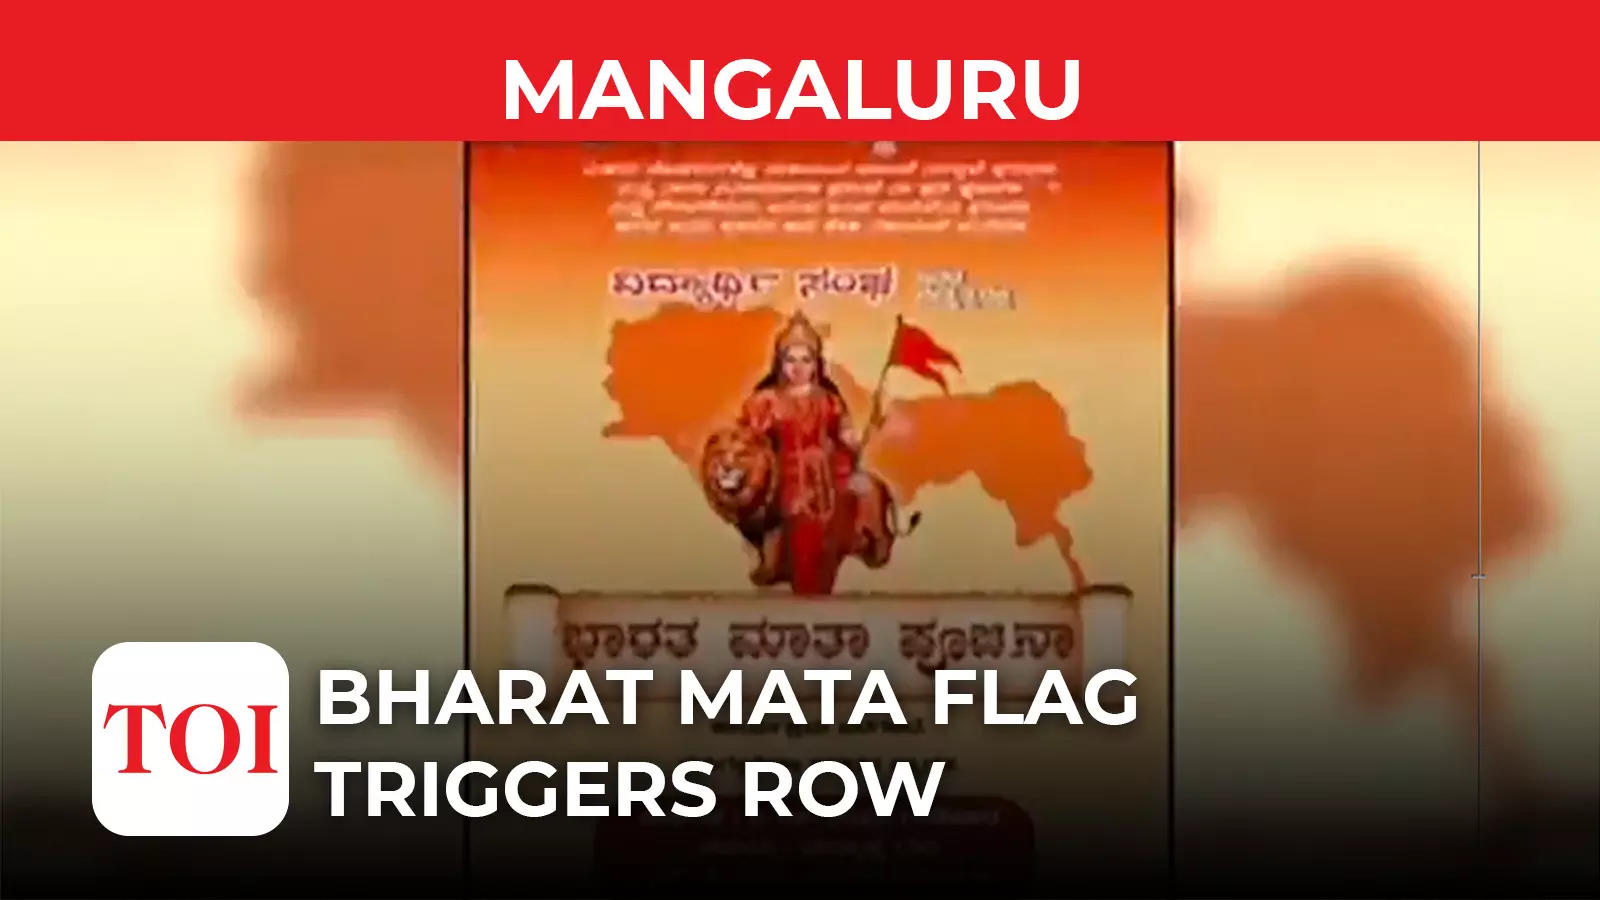 Mangaluru varsity groups are divided over the Bharat Mata flag | City -  Times of India Videos